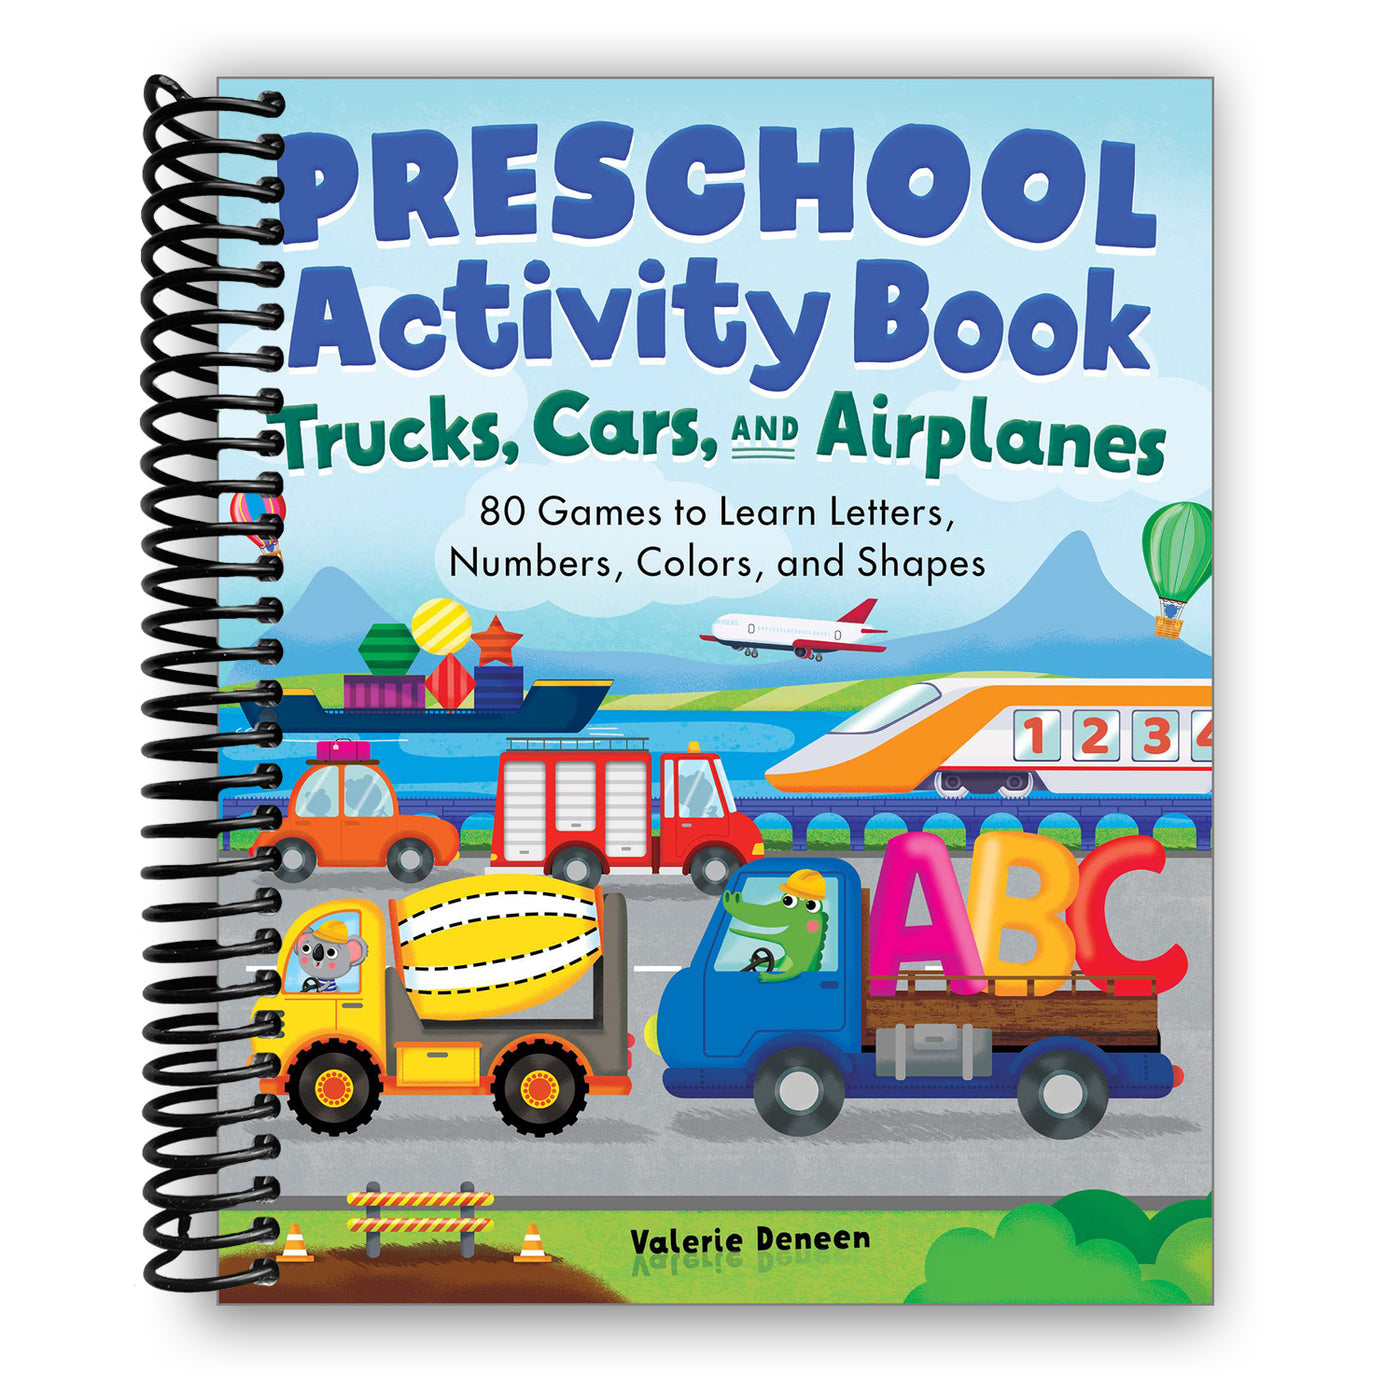 Preschool Activity Book Trucks, Cars, and Airplanes: 80 Games to Learn Letters, Numbers, Colors, and Shapes (Spiral Bound)